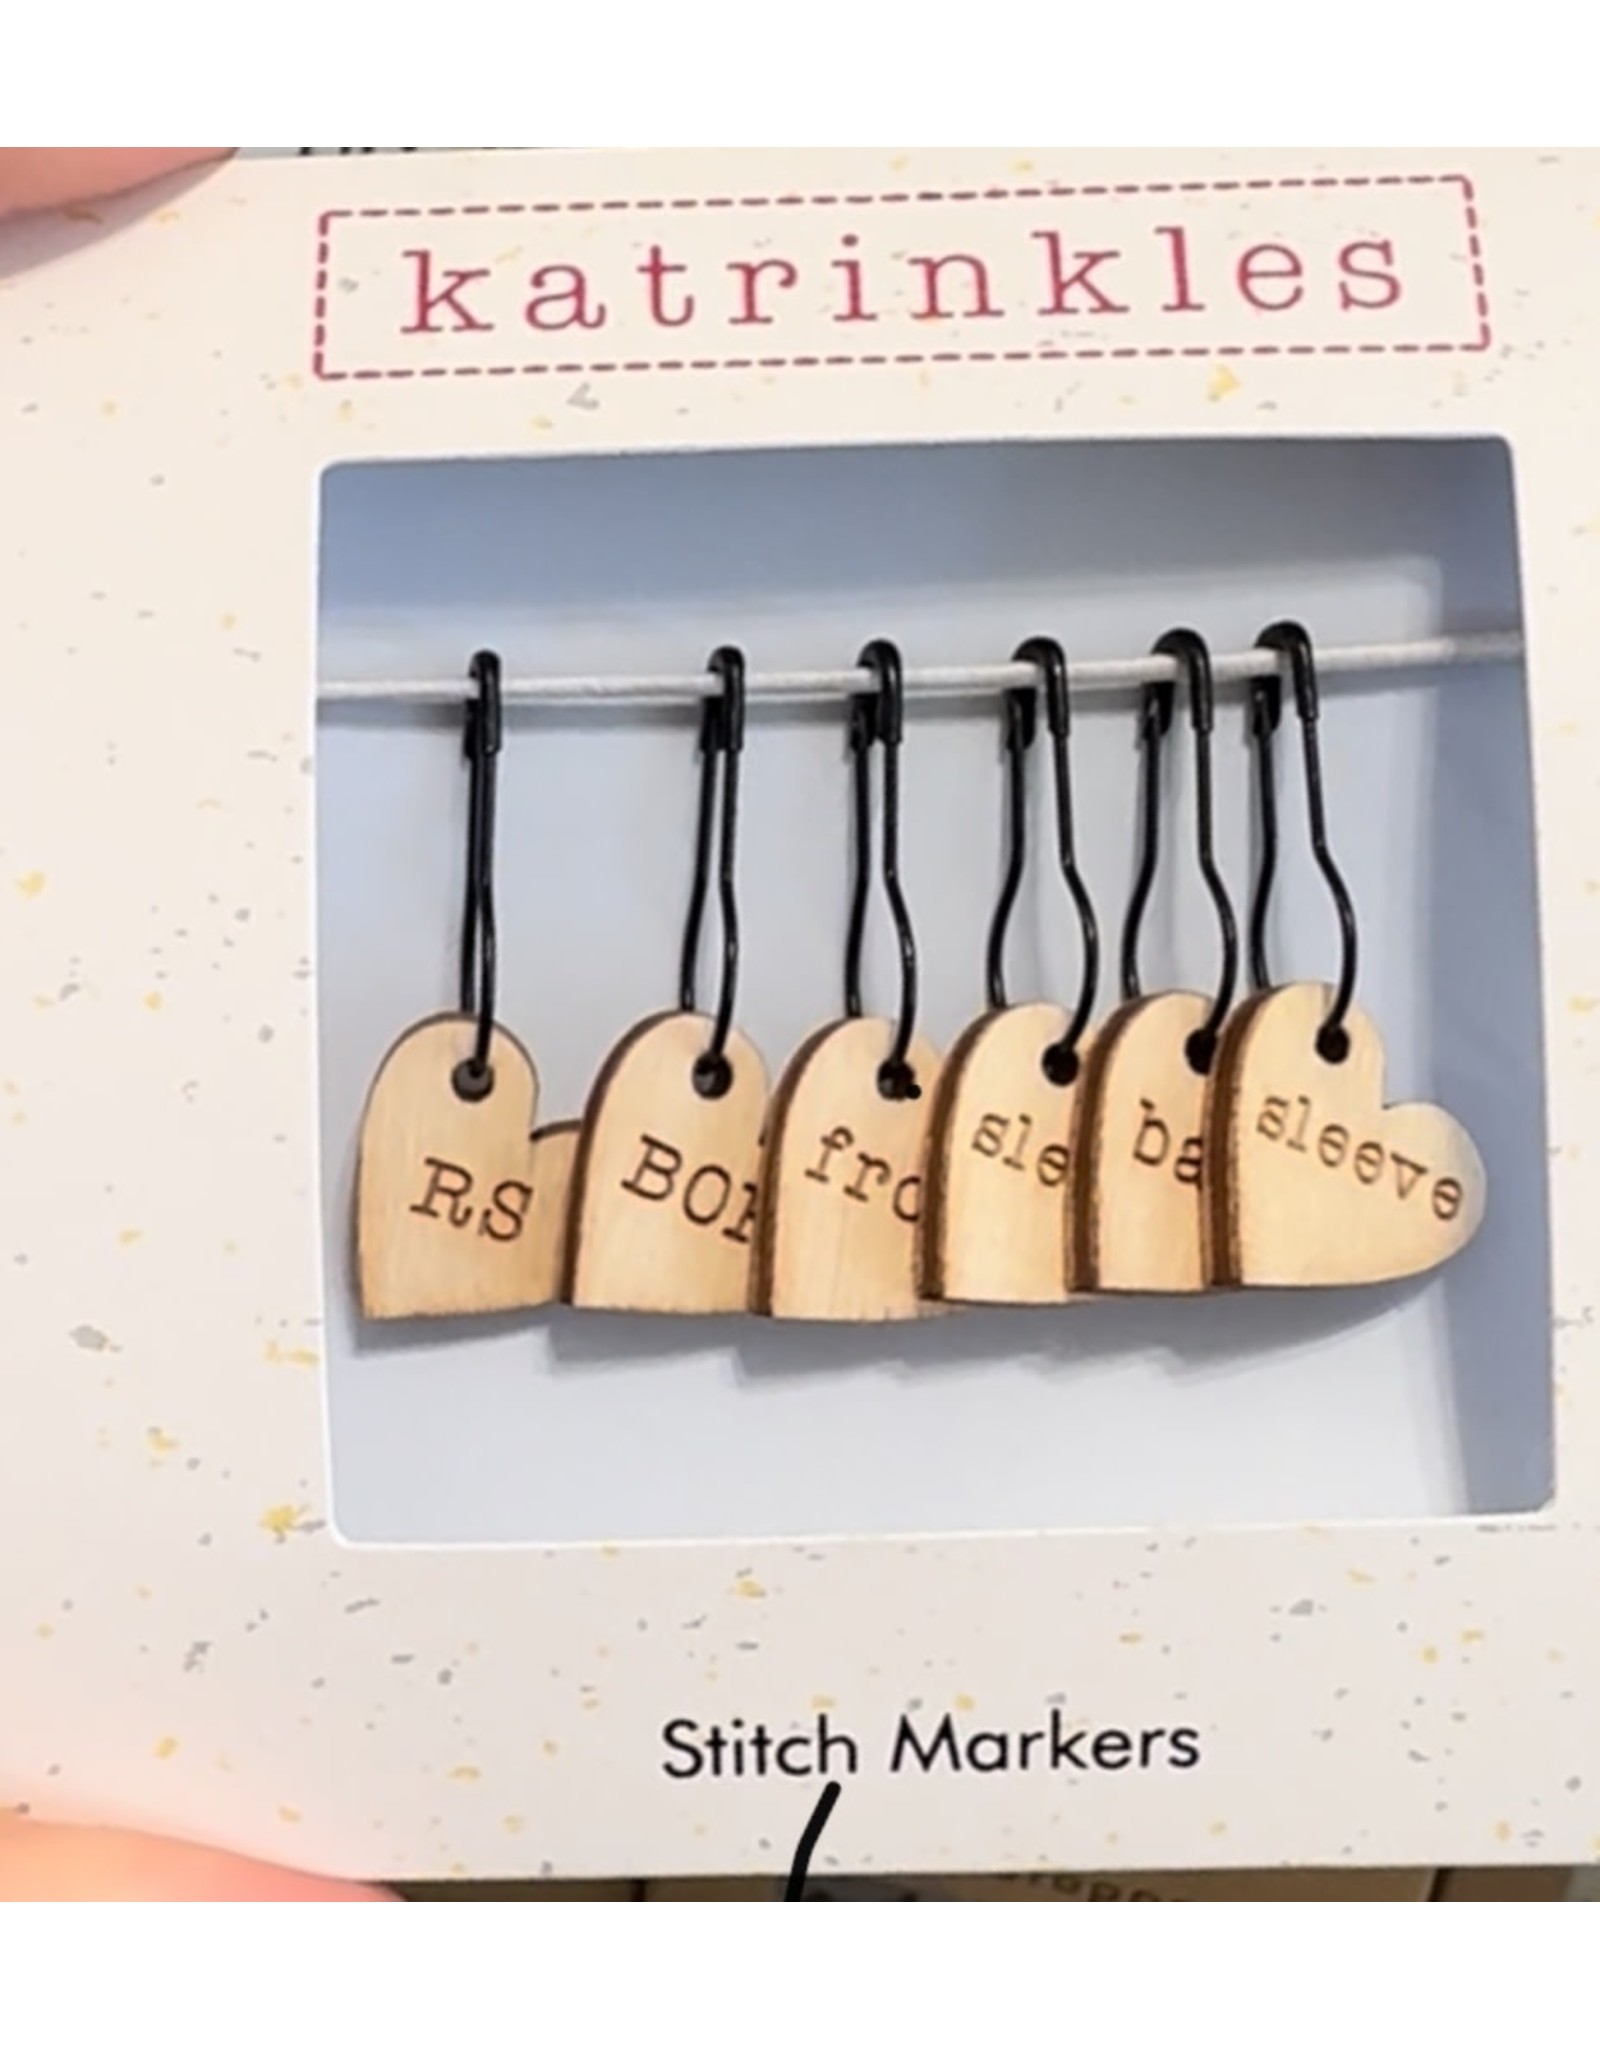 Stitch Markers - Sweater Instructions Pin set by Katrinkles